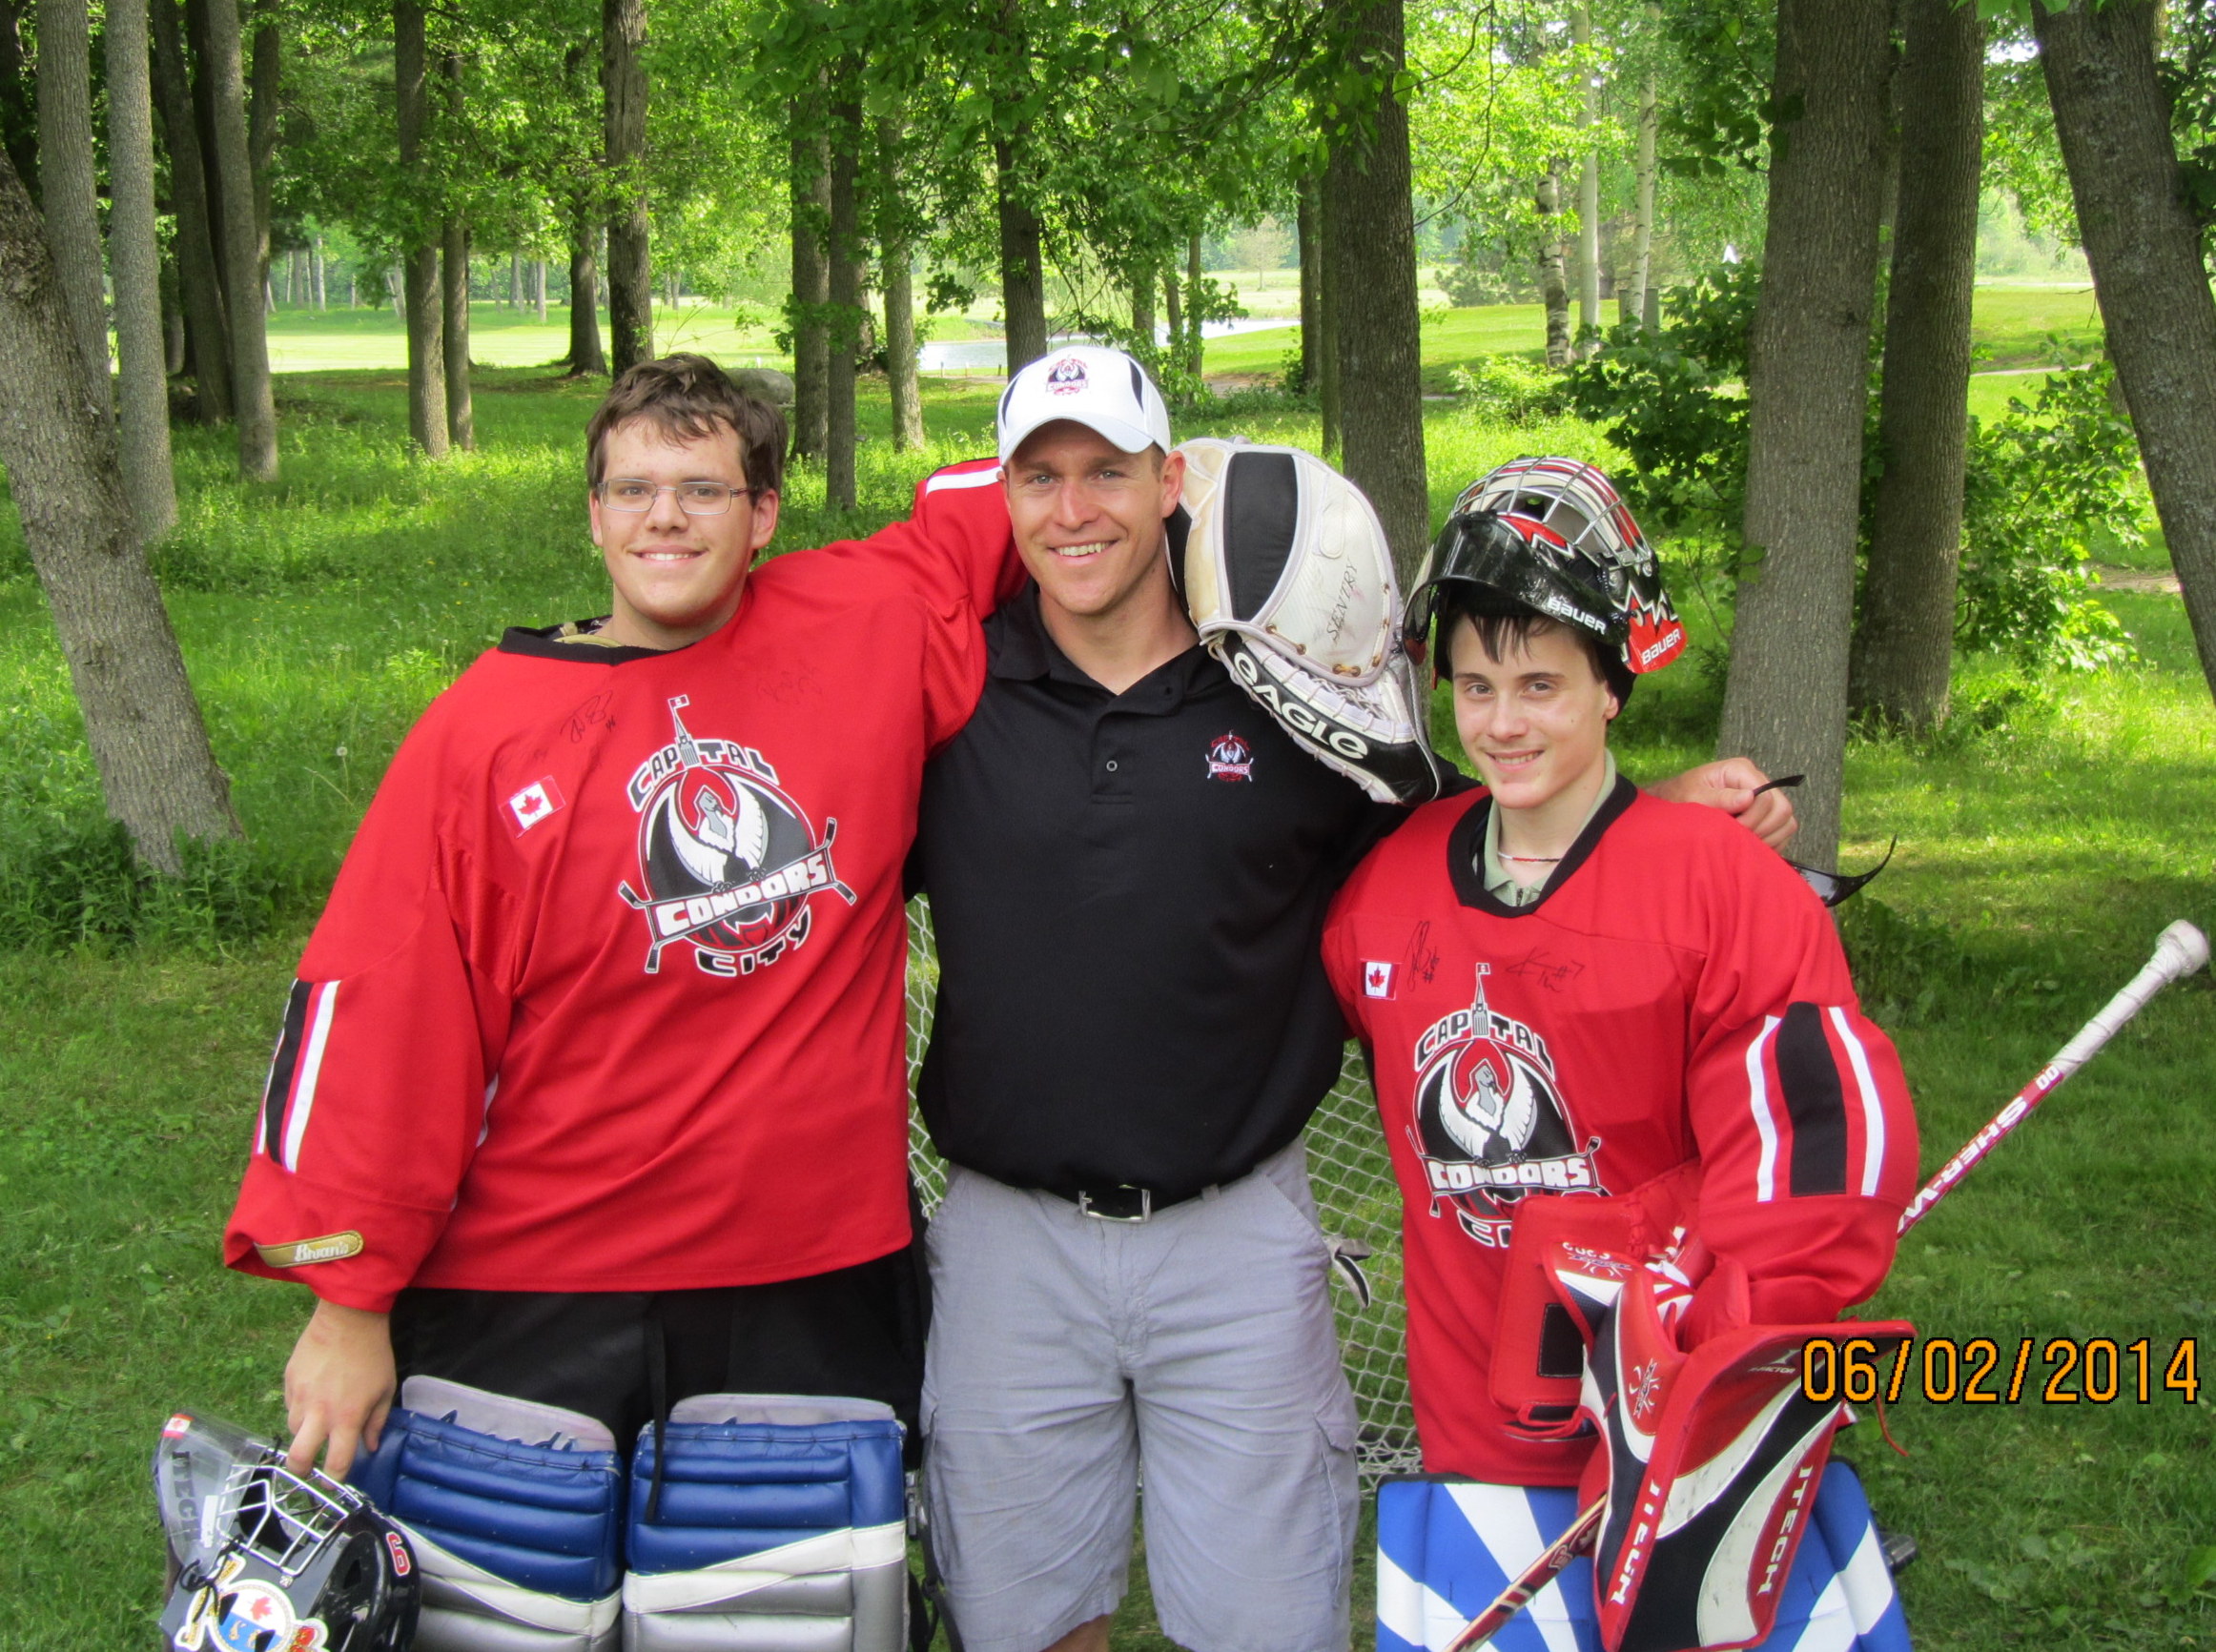 Condors Goalies: Zac & Derek with Matt Carkner! Thanks, Matt, for driving up from Long Island to support your other "home team" for the day! We can't tell you how much that meant to all of us!